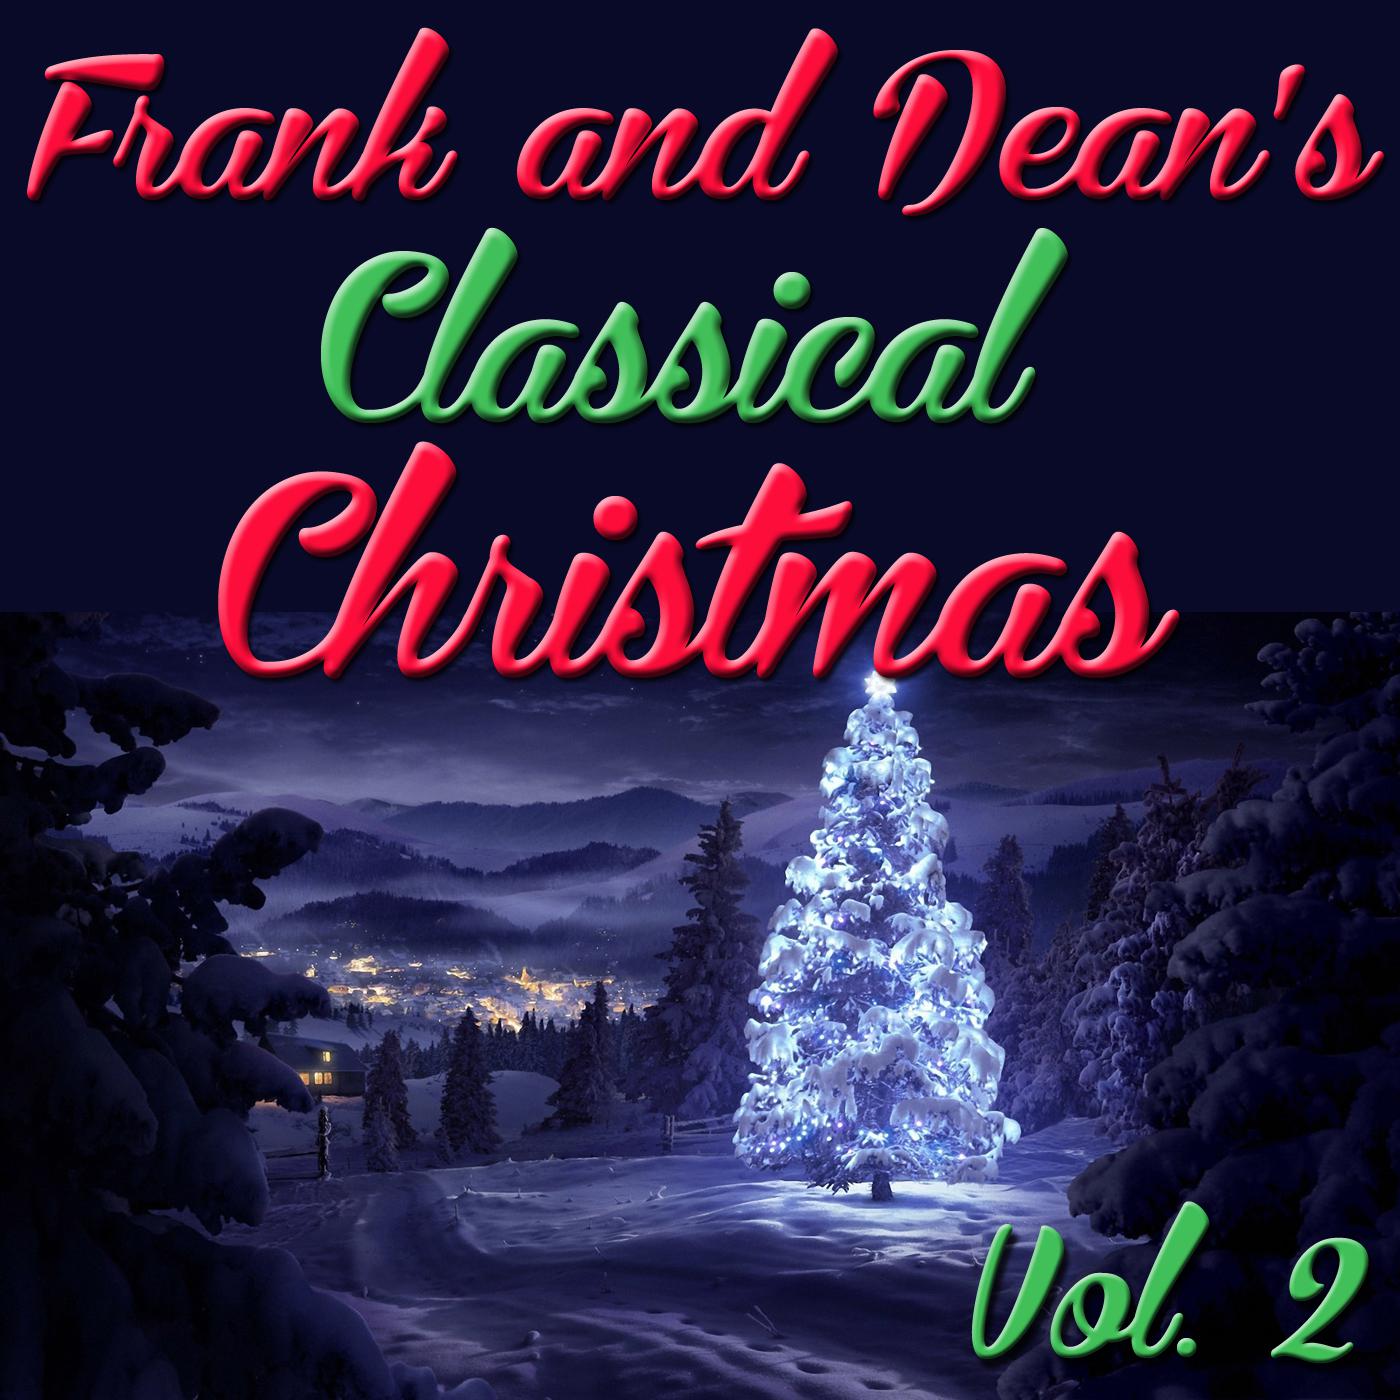 Frank and Dean's Classical Christmas, Vol. 2